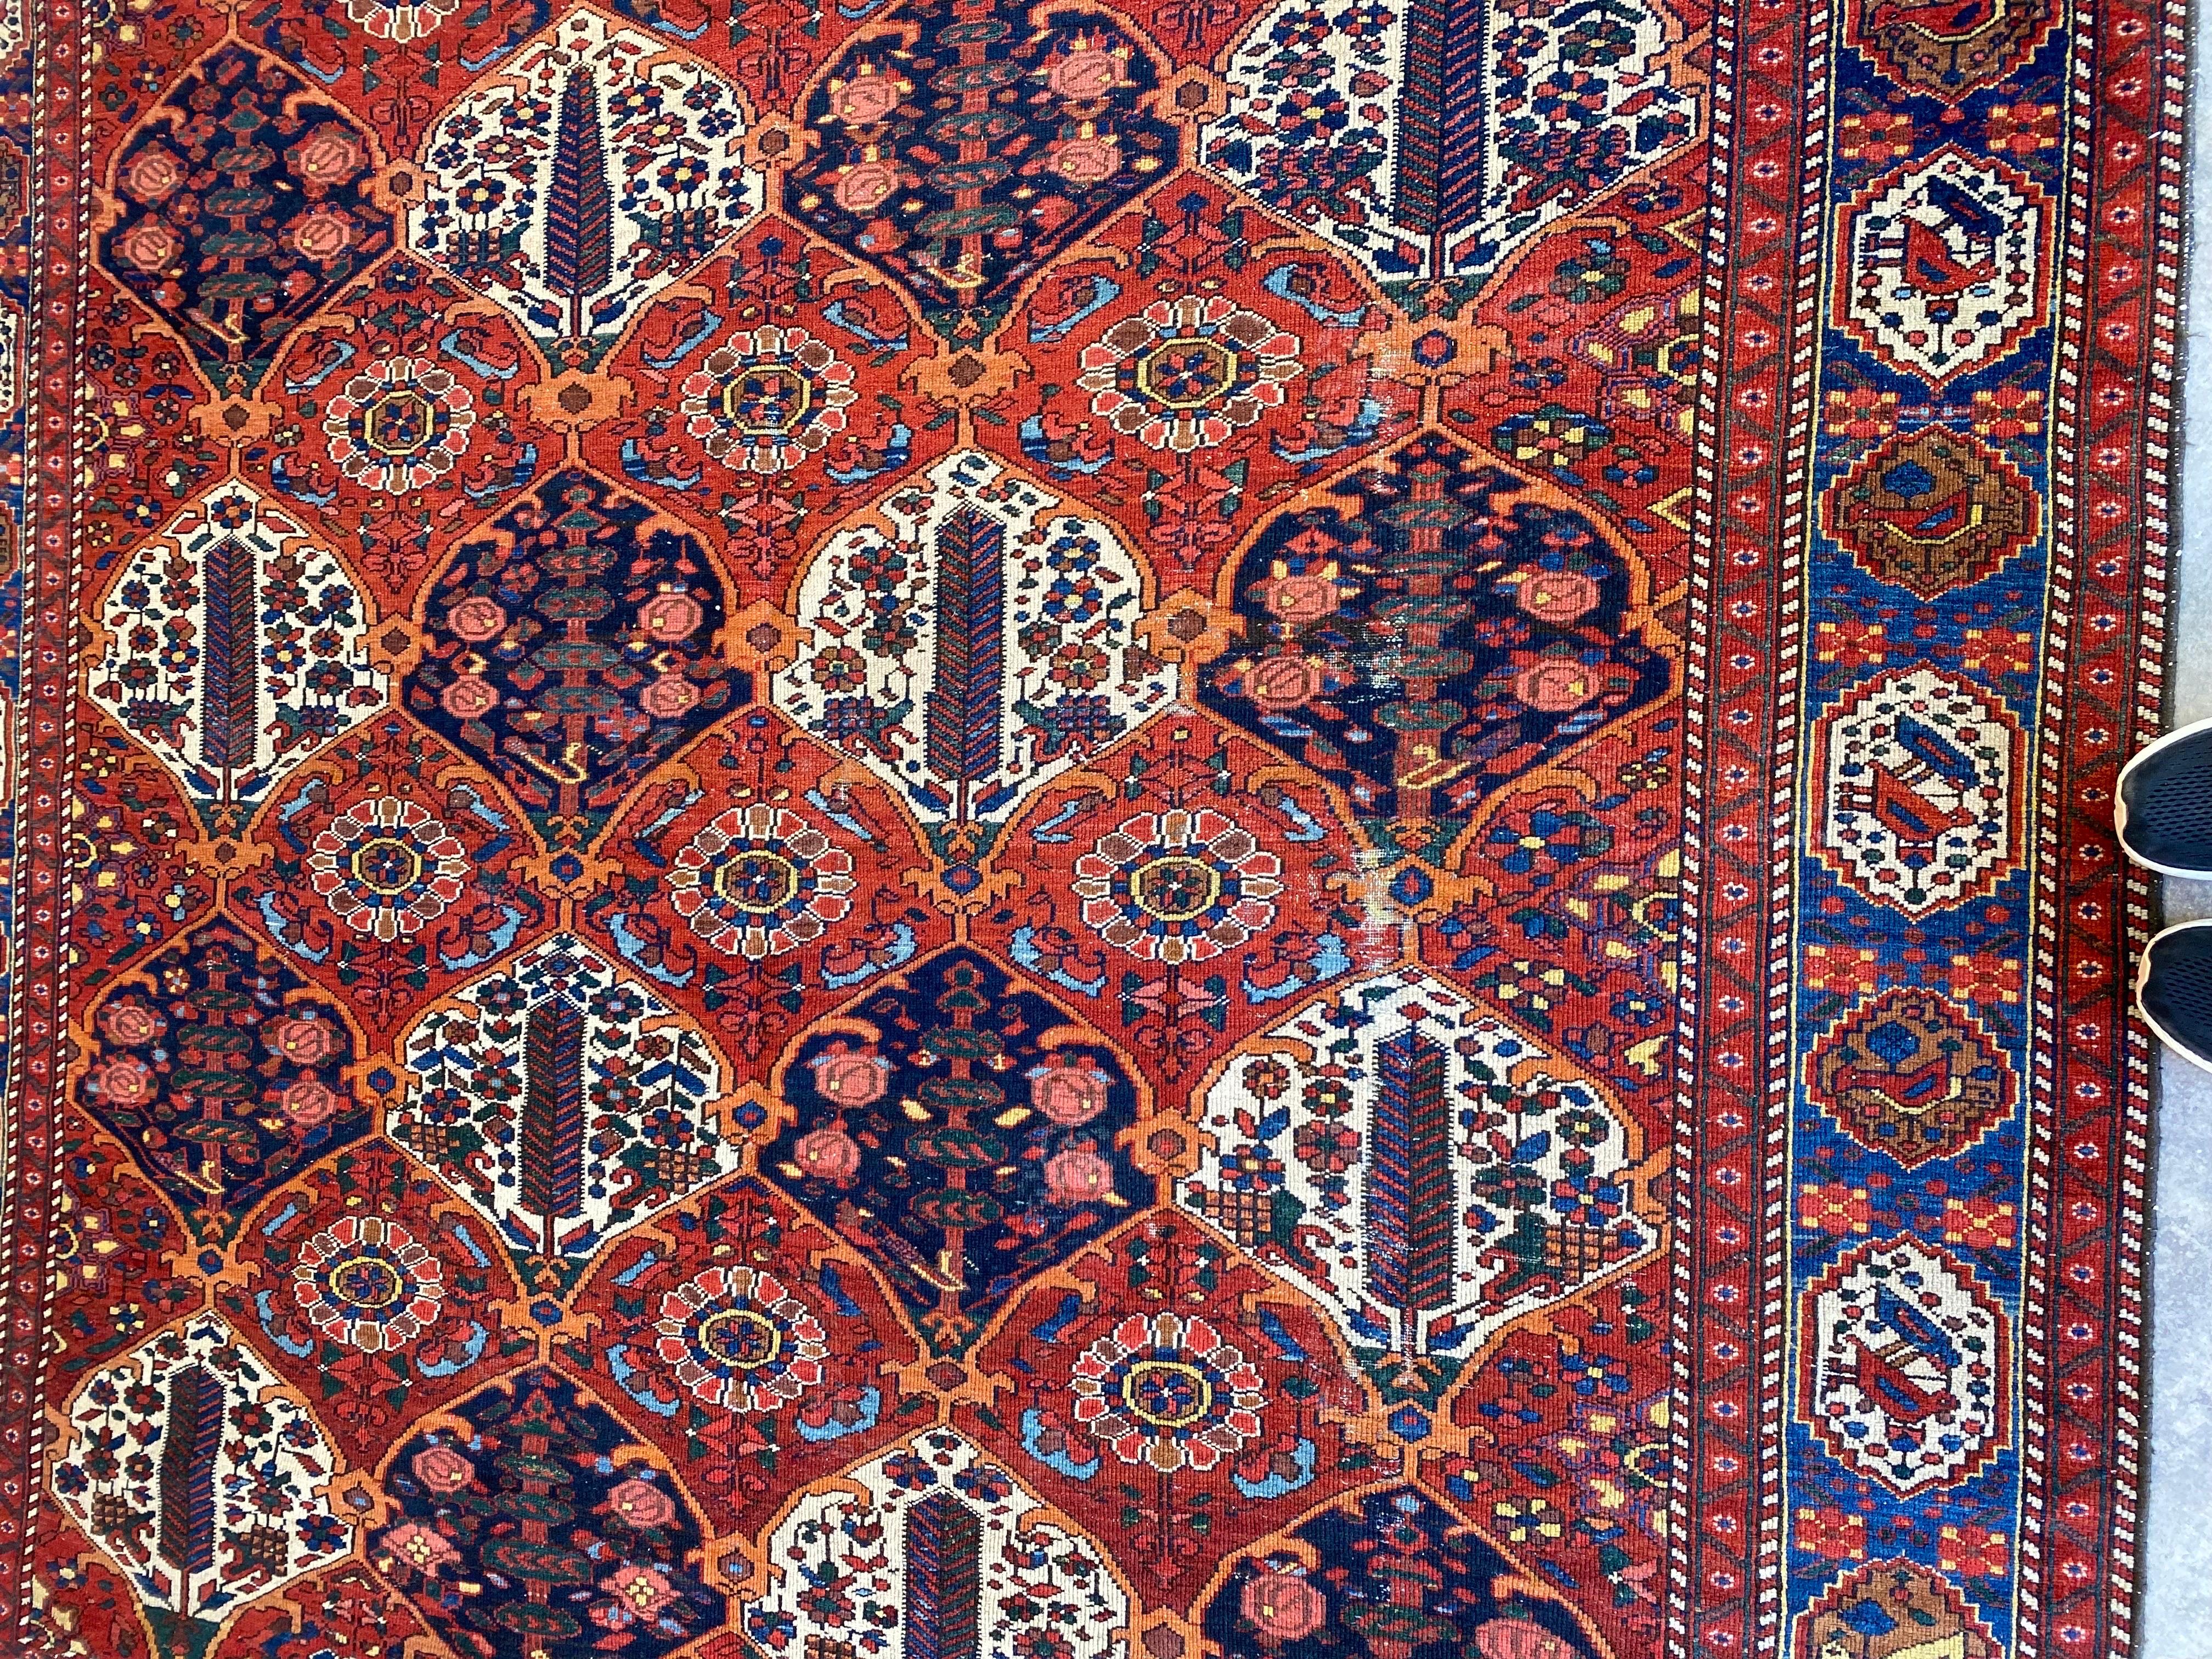 This is an Antique Persian Bahktiari carpet with a beautiful low pile, fine knotting. In wonderful condition with a few areas of wear (see closeups). There are a few spots where the pile has worn down to the foundation, but the foundation is strong